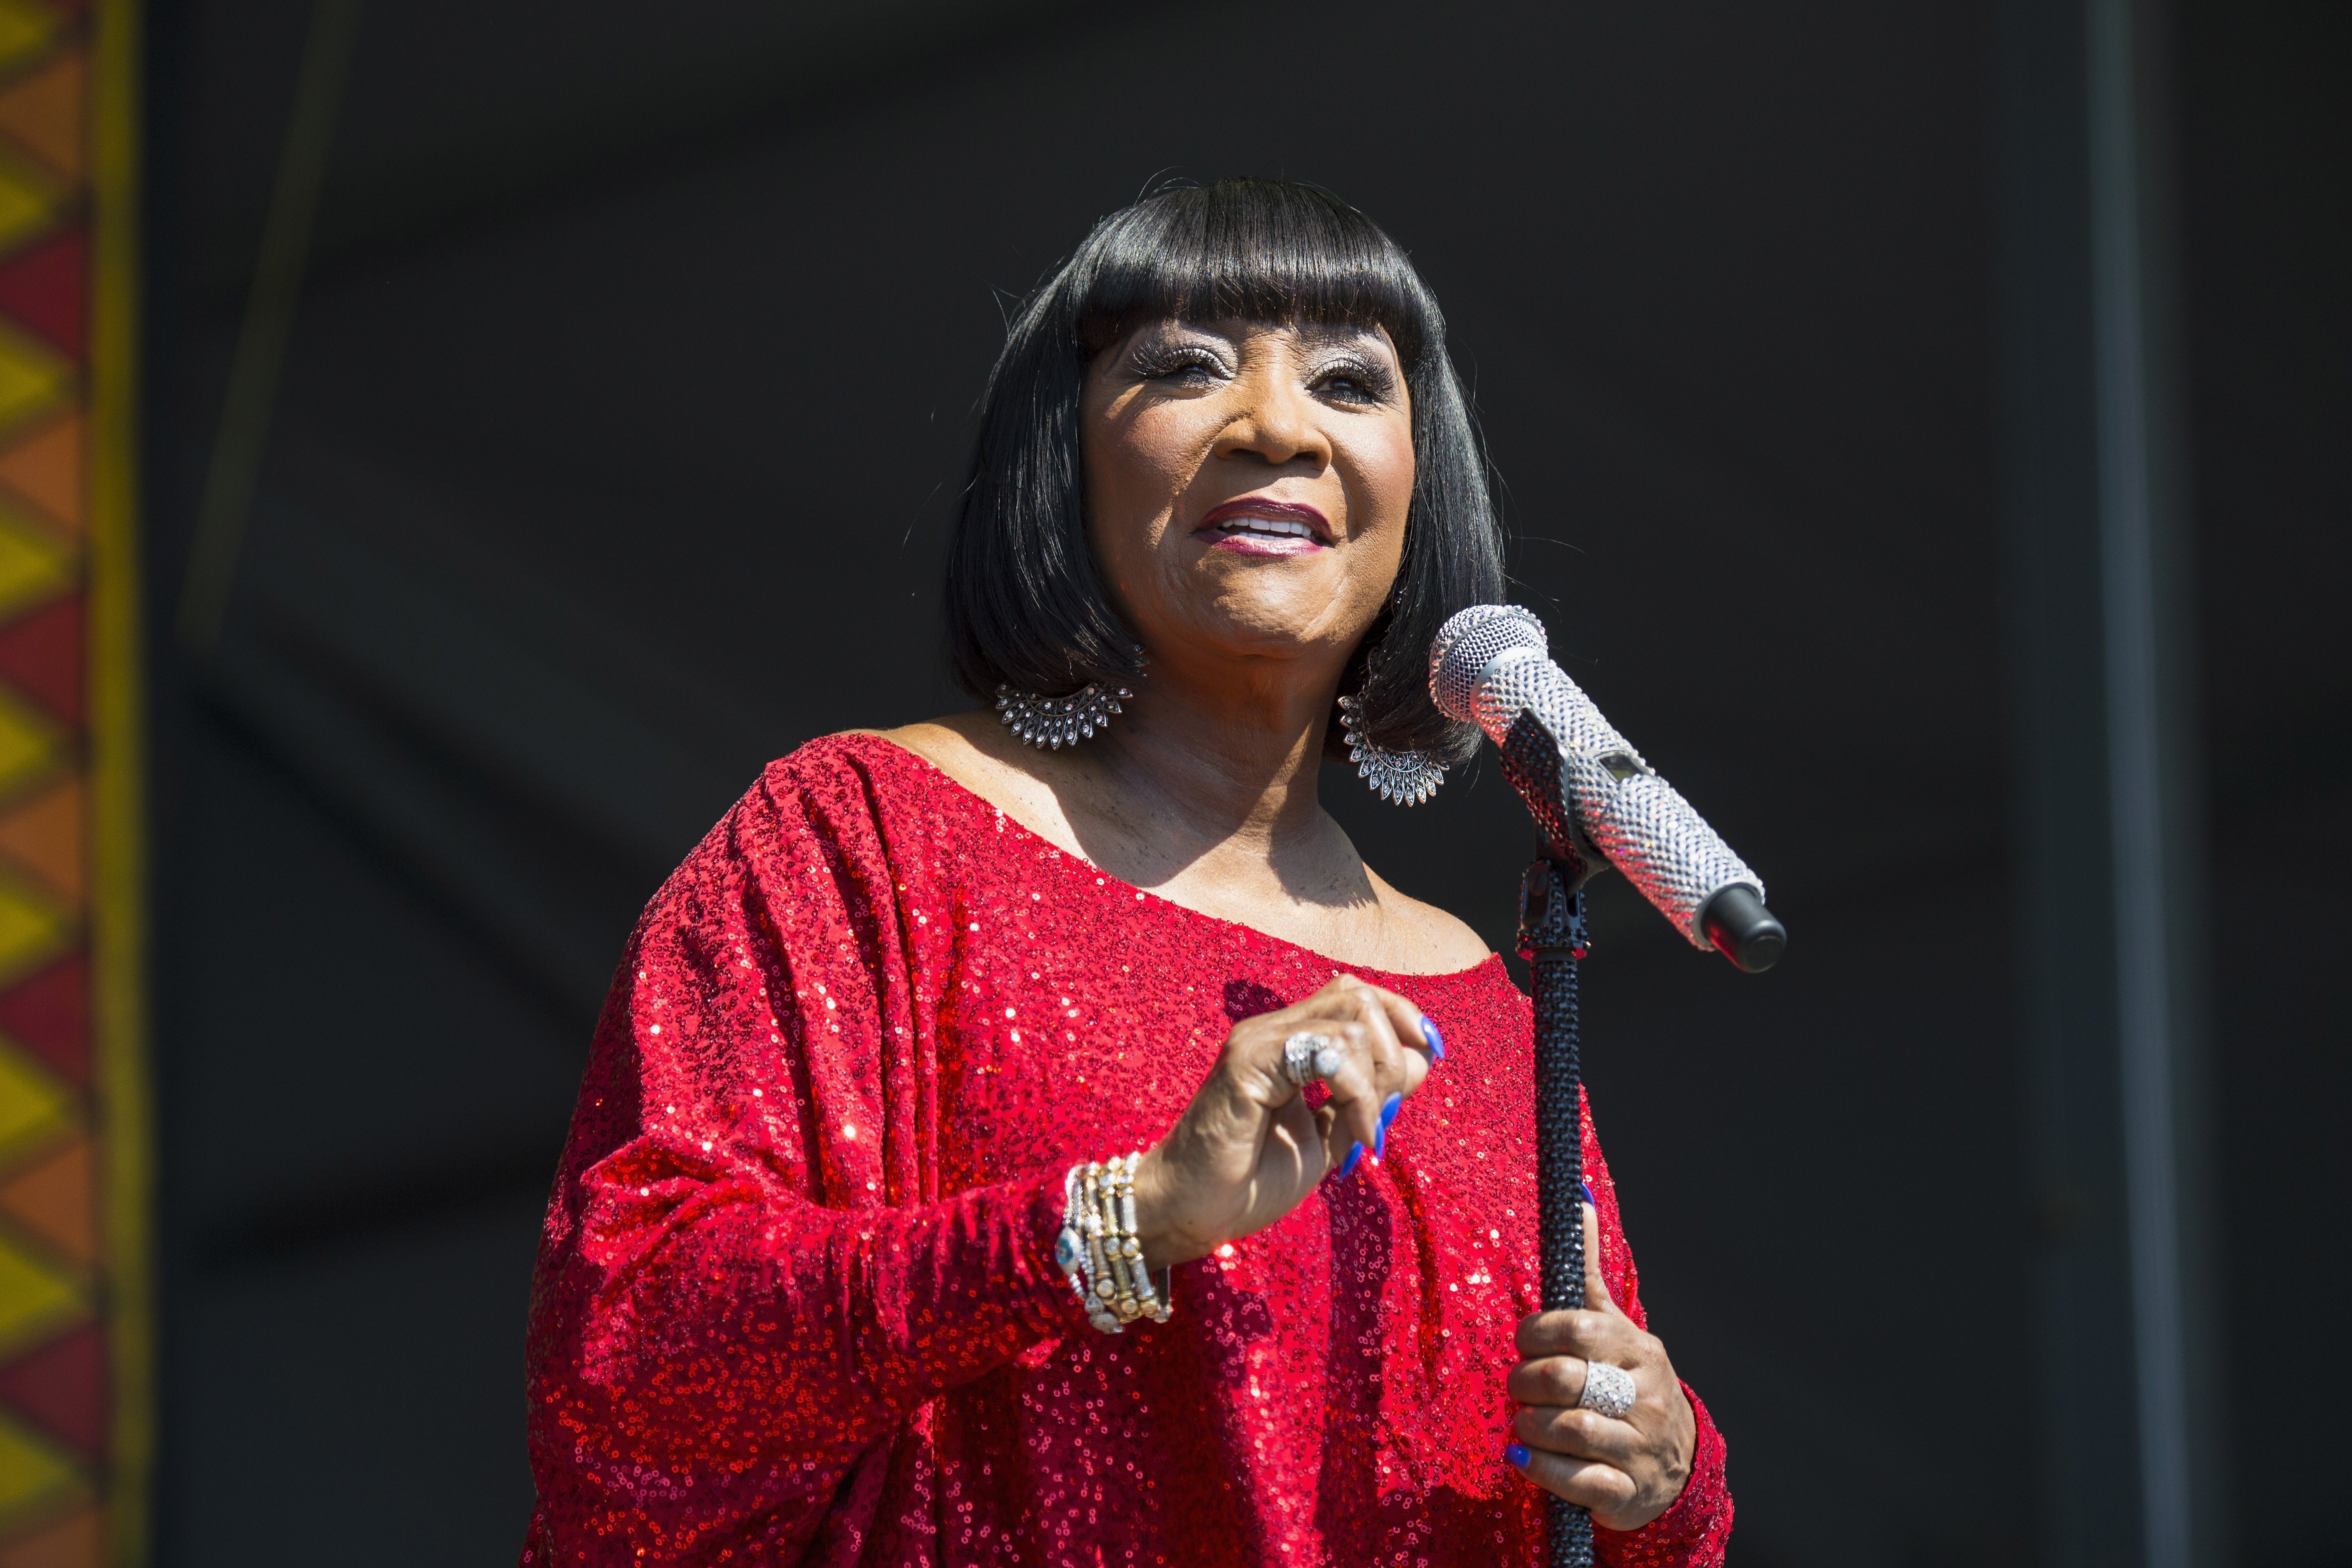 Patti LaBelle performs during the 2017 New Orleans Jazz & Heritage Festival at Fair Grounds Race Course on May 7, 2017 | Photo: GettyImages